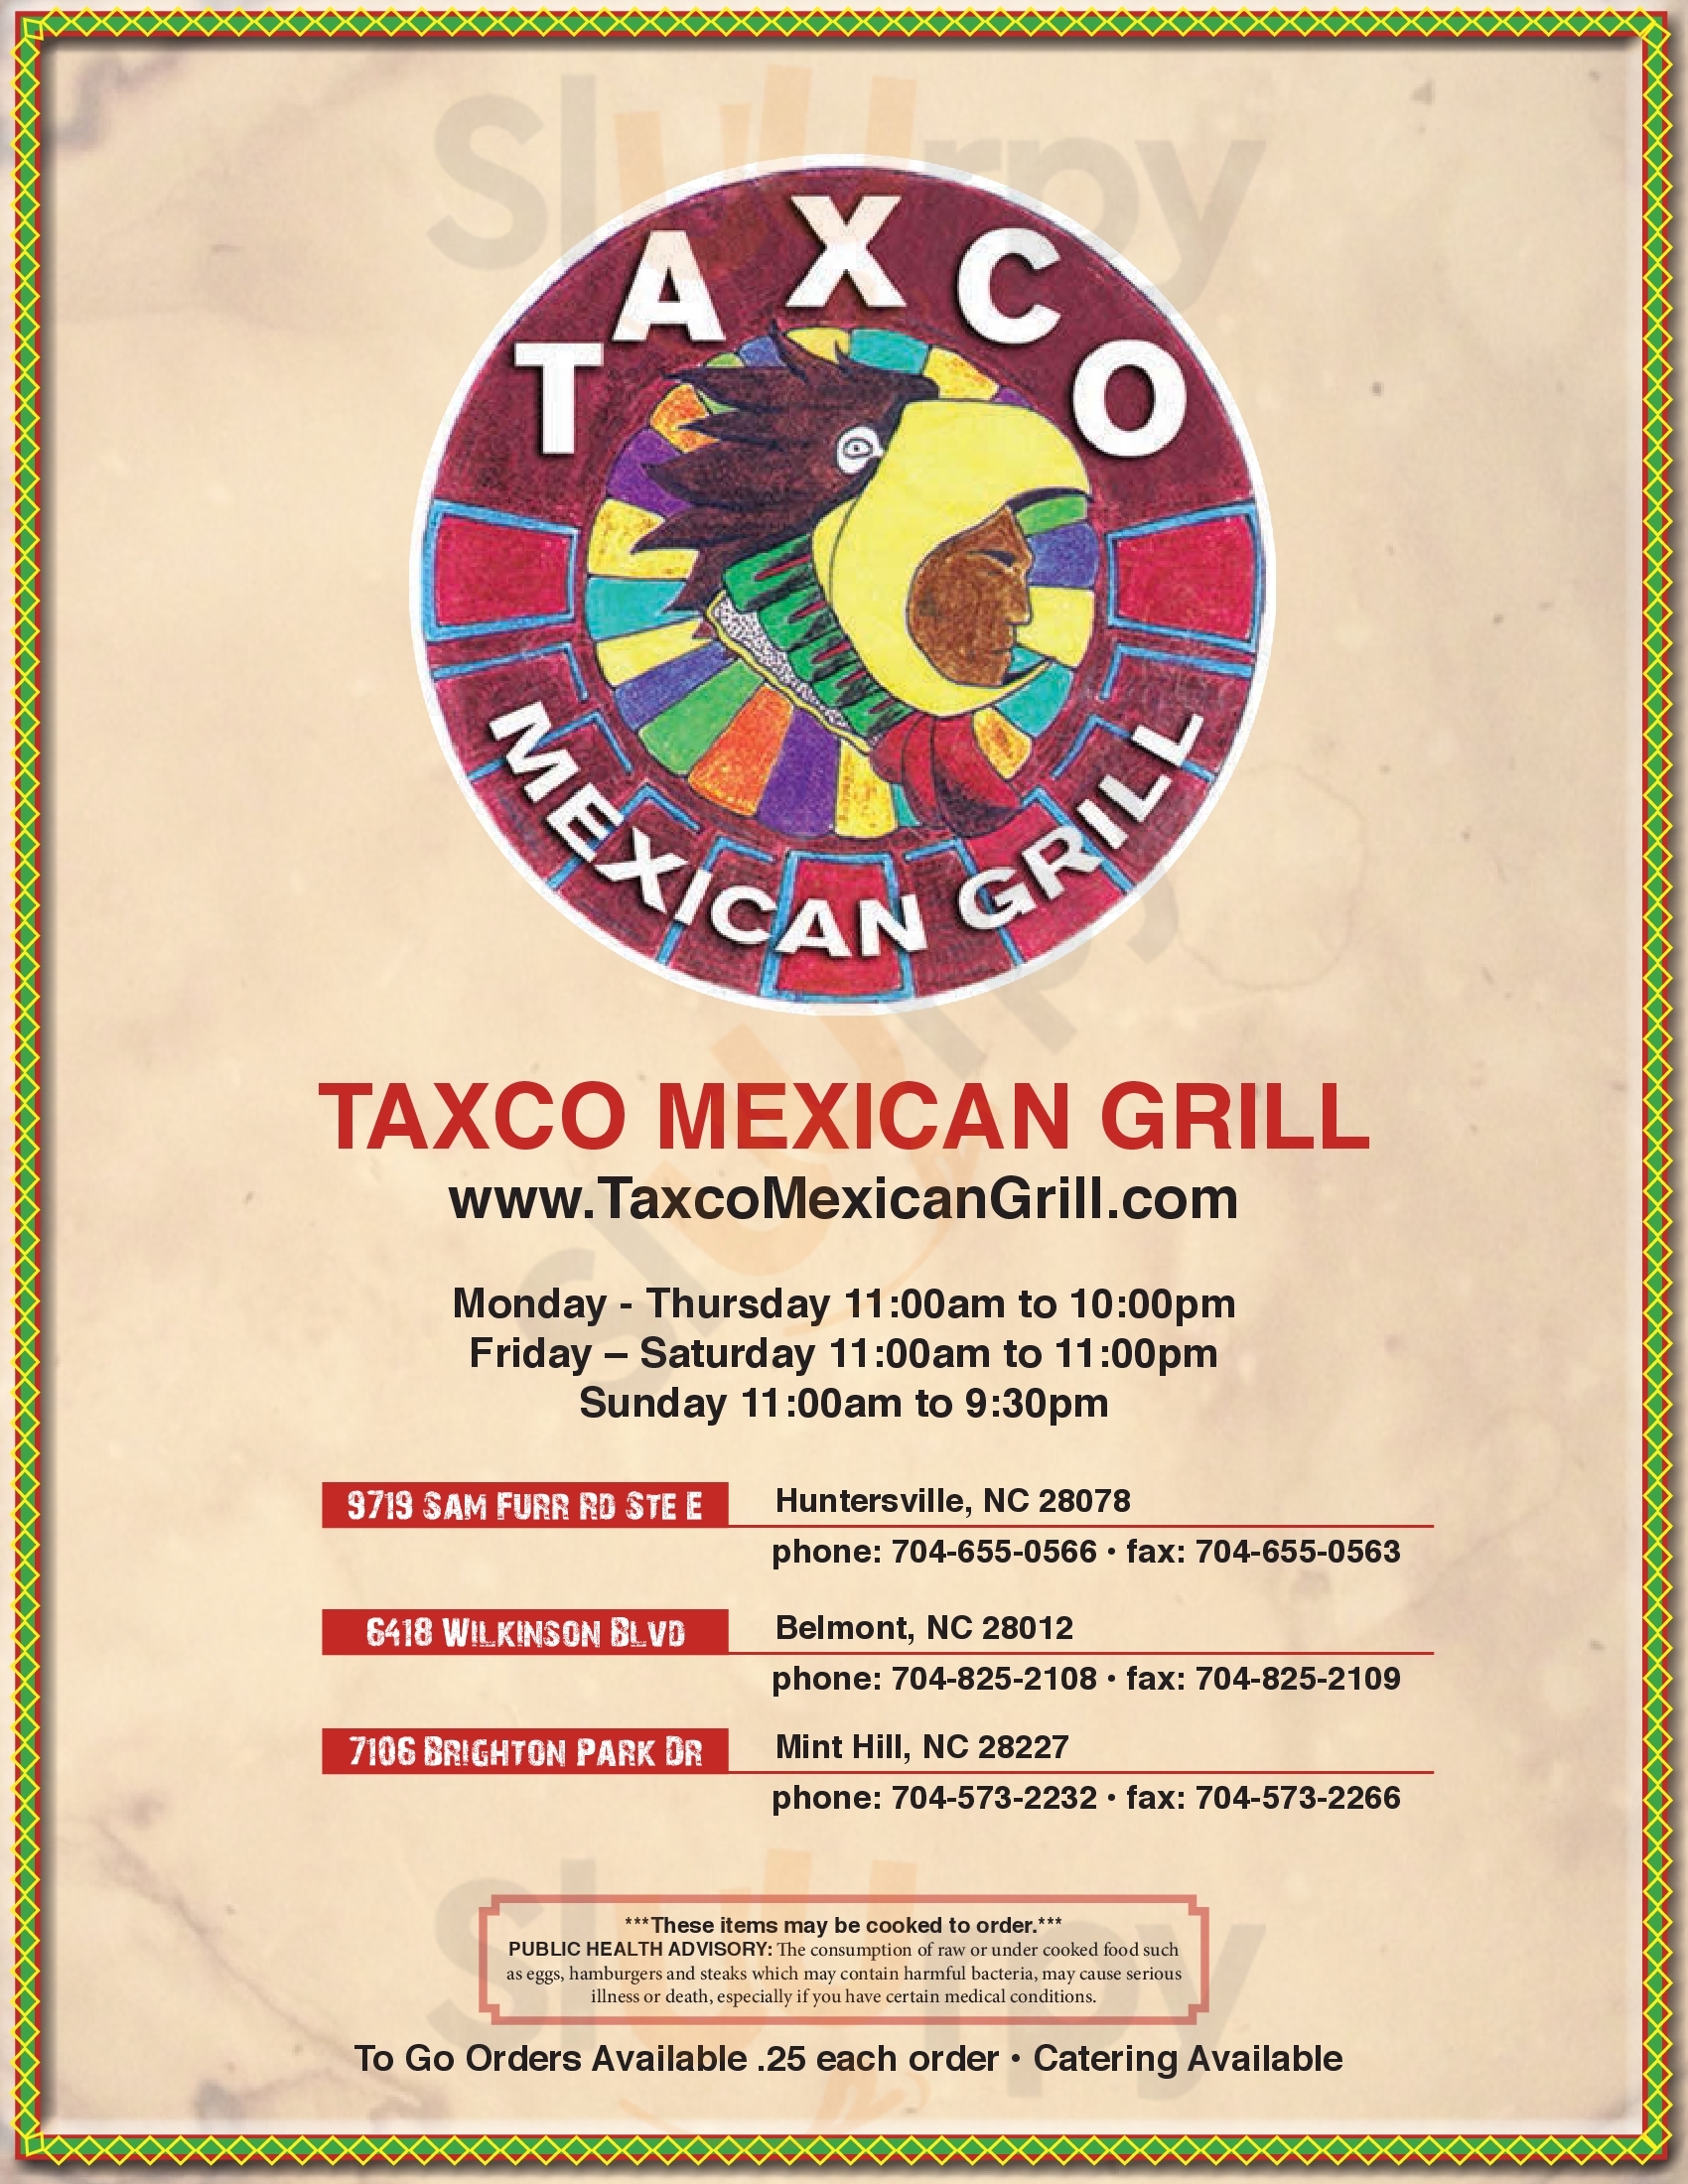 Taxco Mexican Grill Belmont Menu - 1